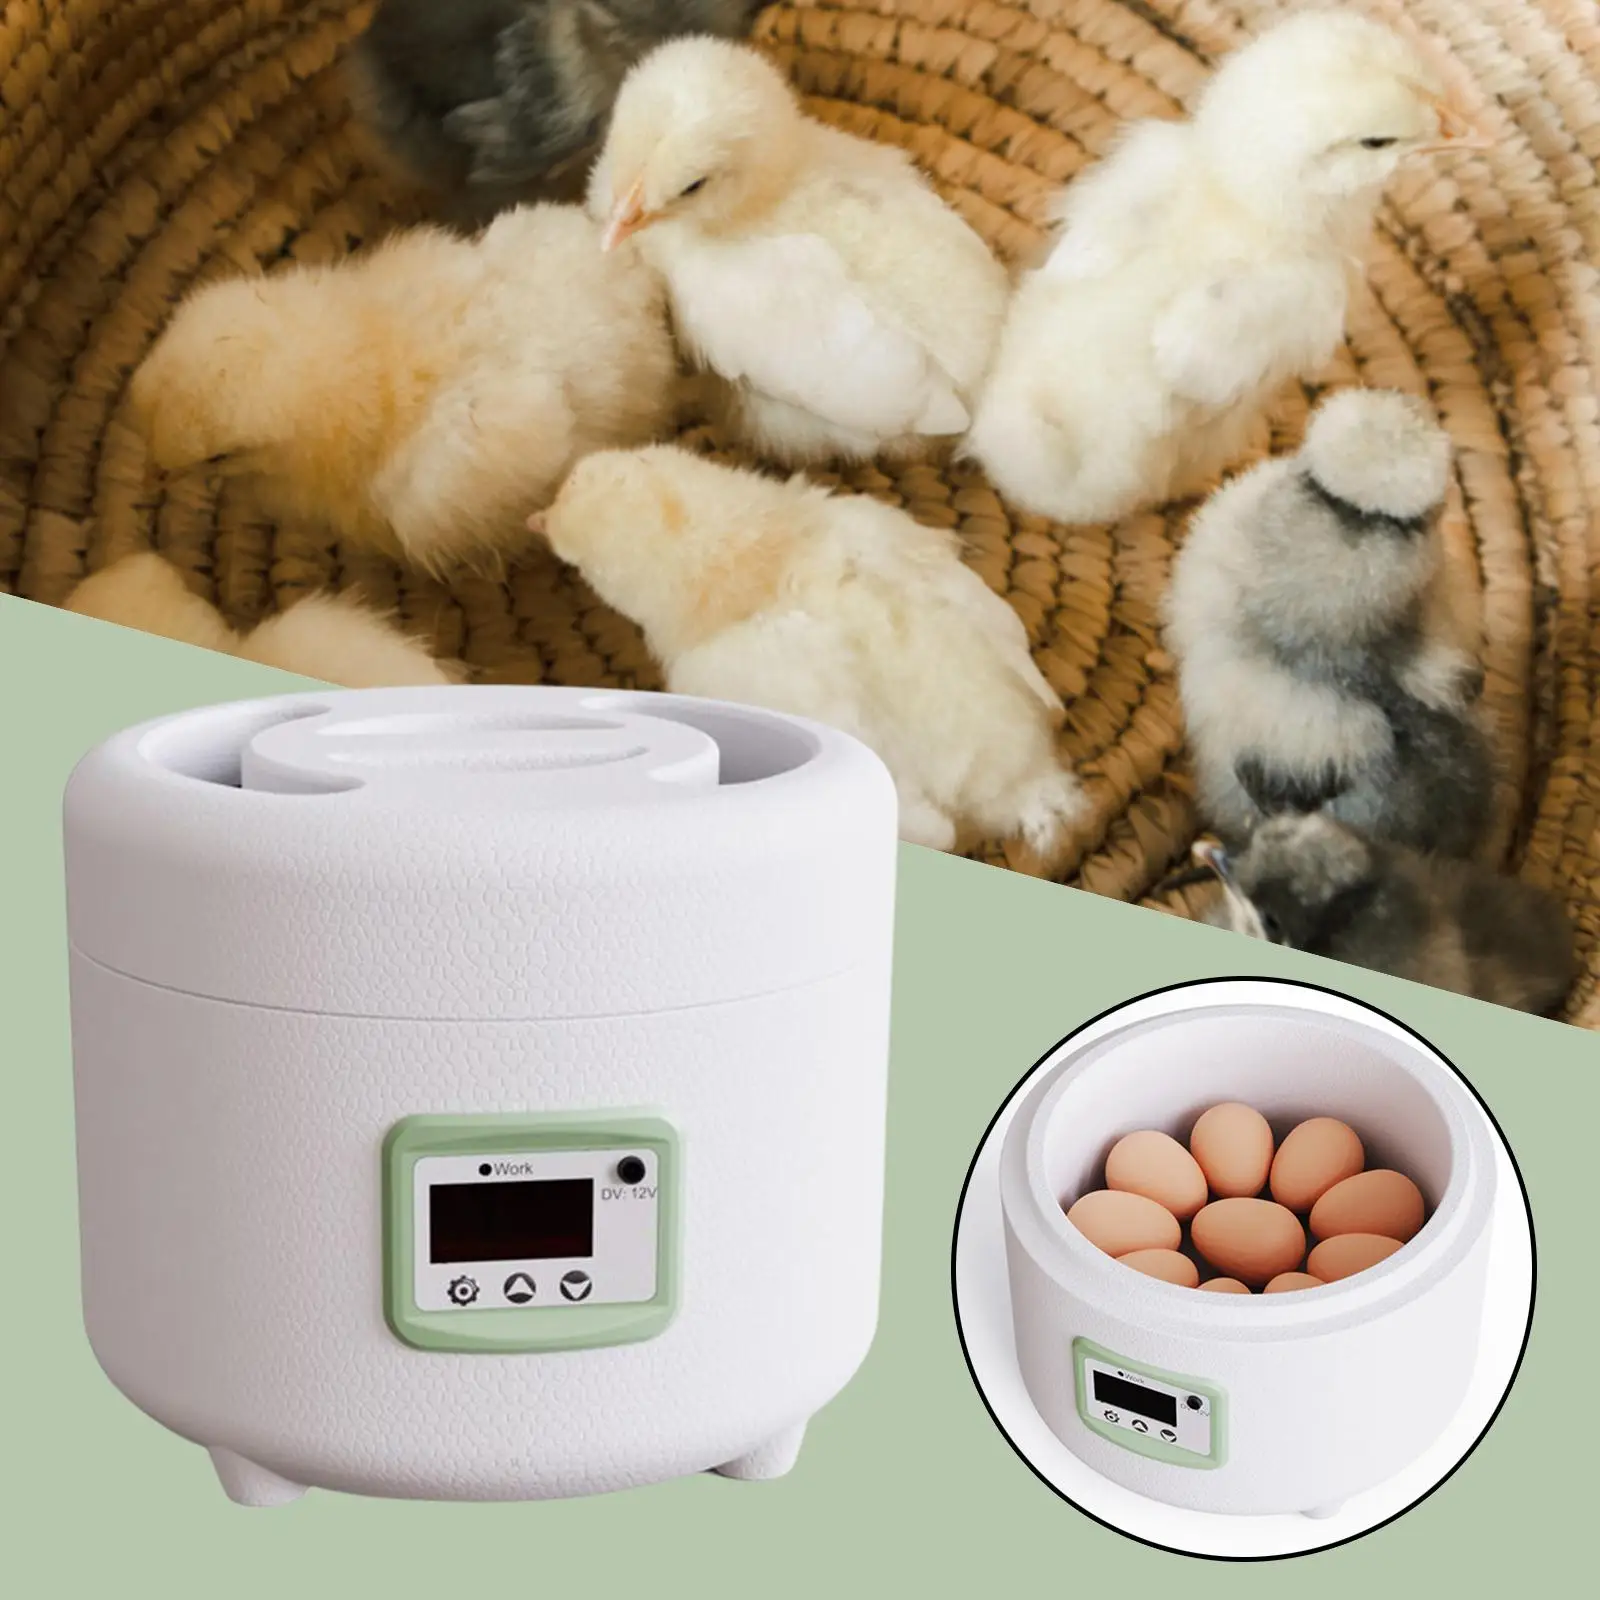 Digital Automatic Egg Incubator Poultry Hatcher for Hatching Turkey Parakeet